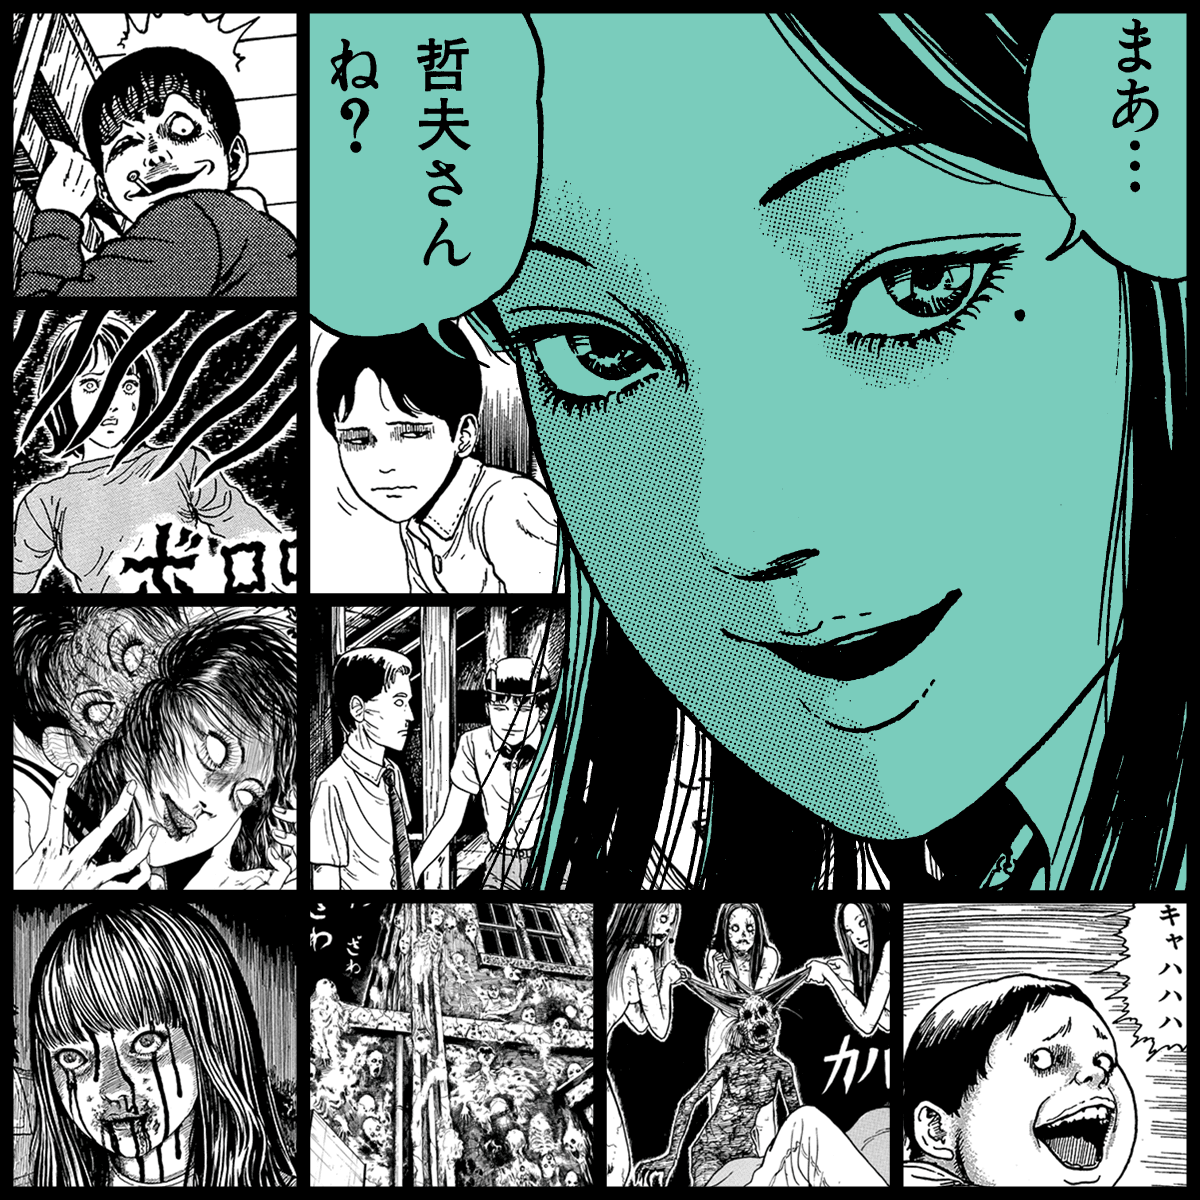 TOMIE by Junji Ito #47